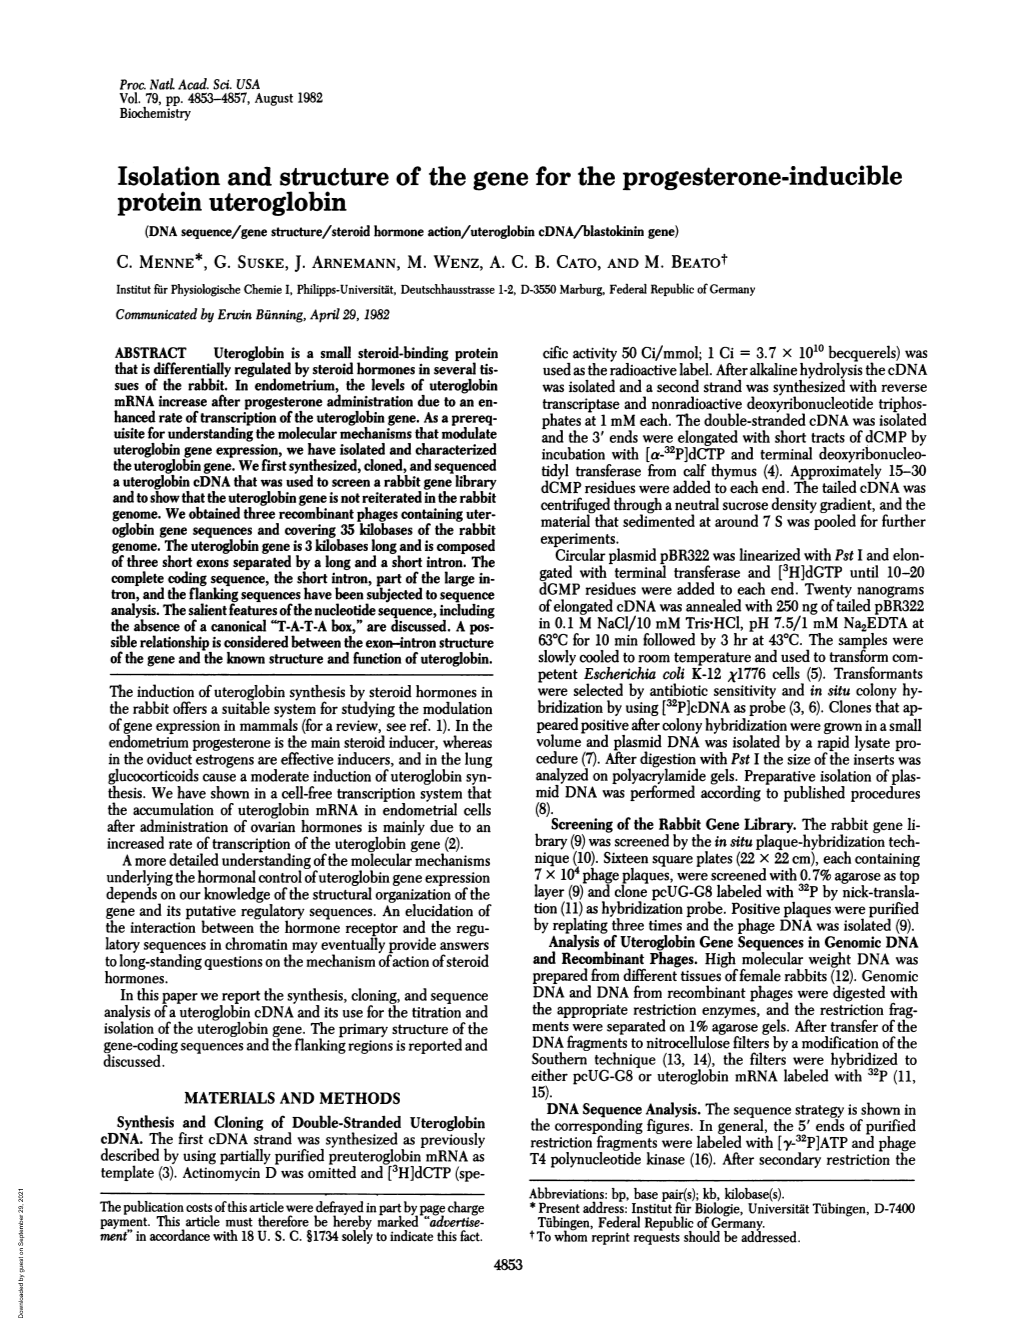 Isolation and Structure of the Gene for the Progesterone-Inducible Protein Uteroglobin